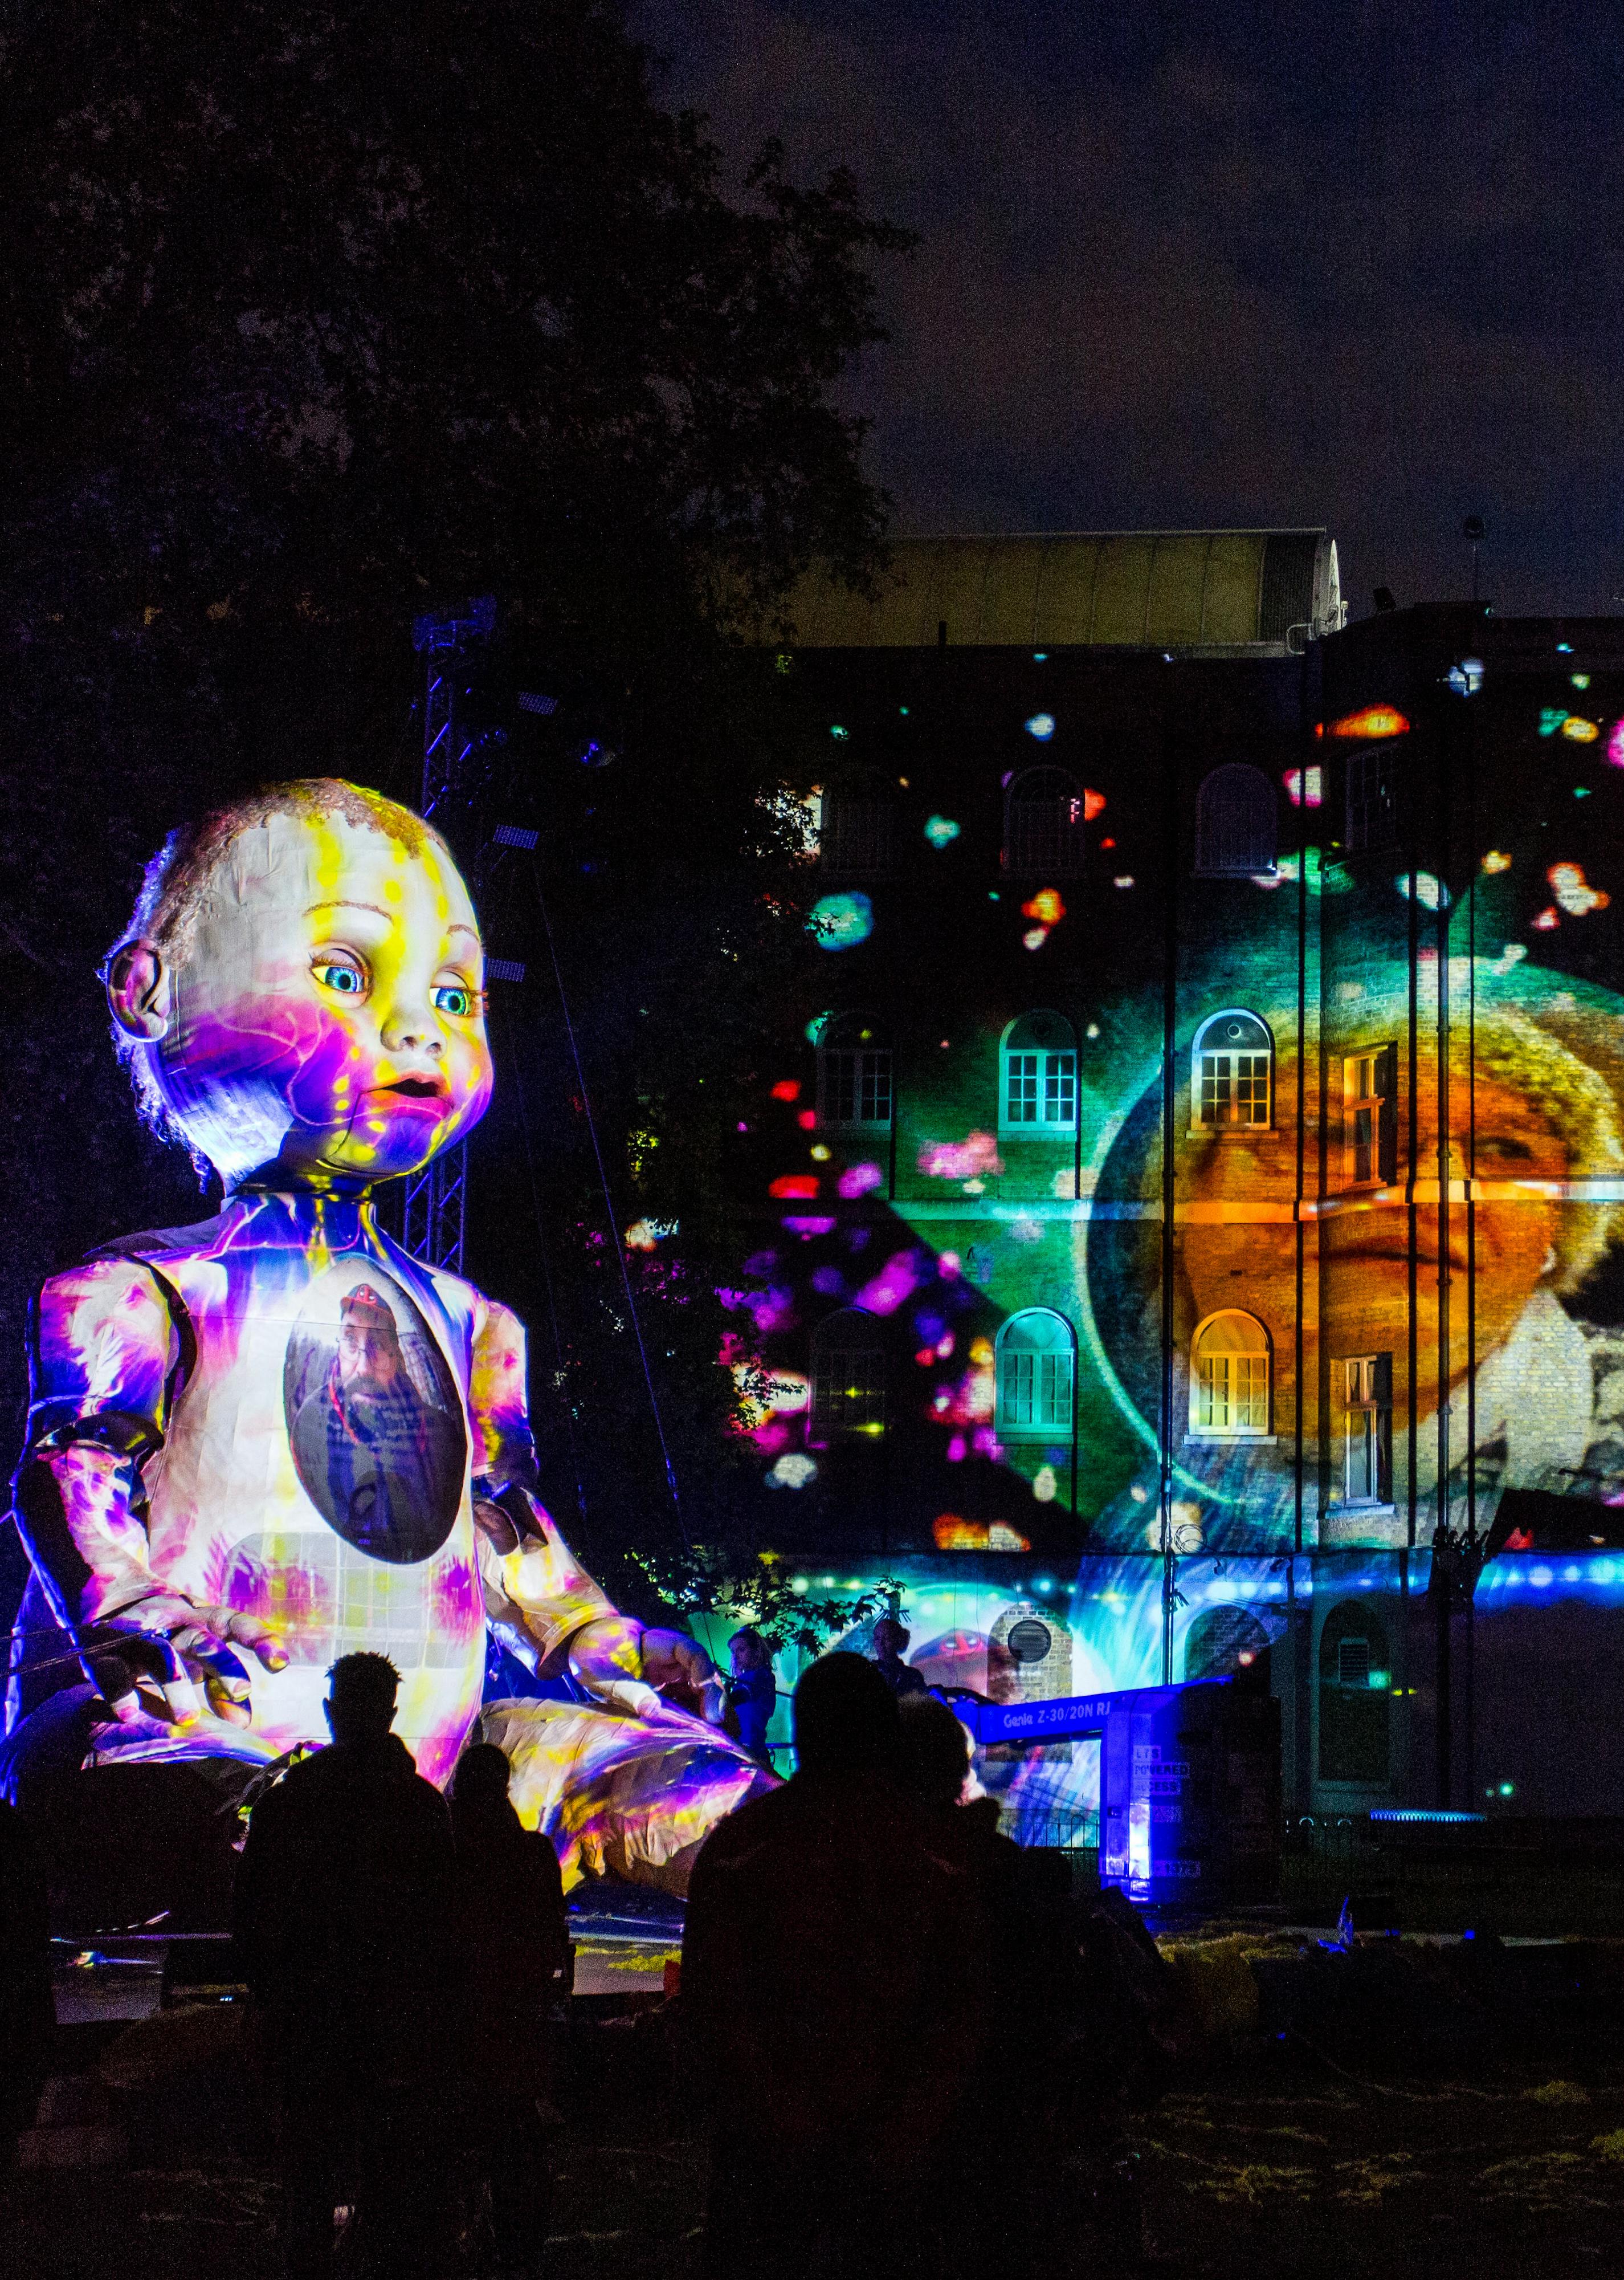 A giant puppet of a baby covered in projections that also cover the building next to it